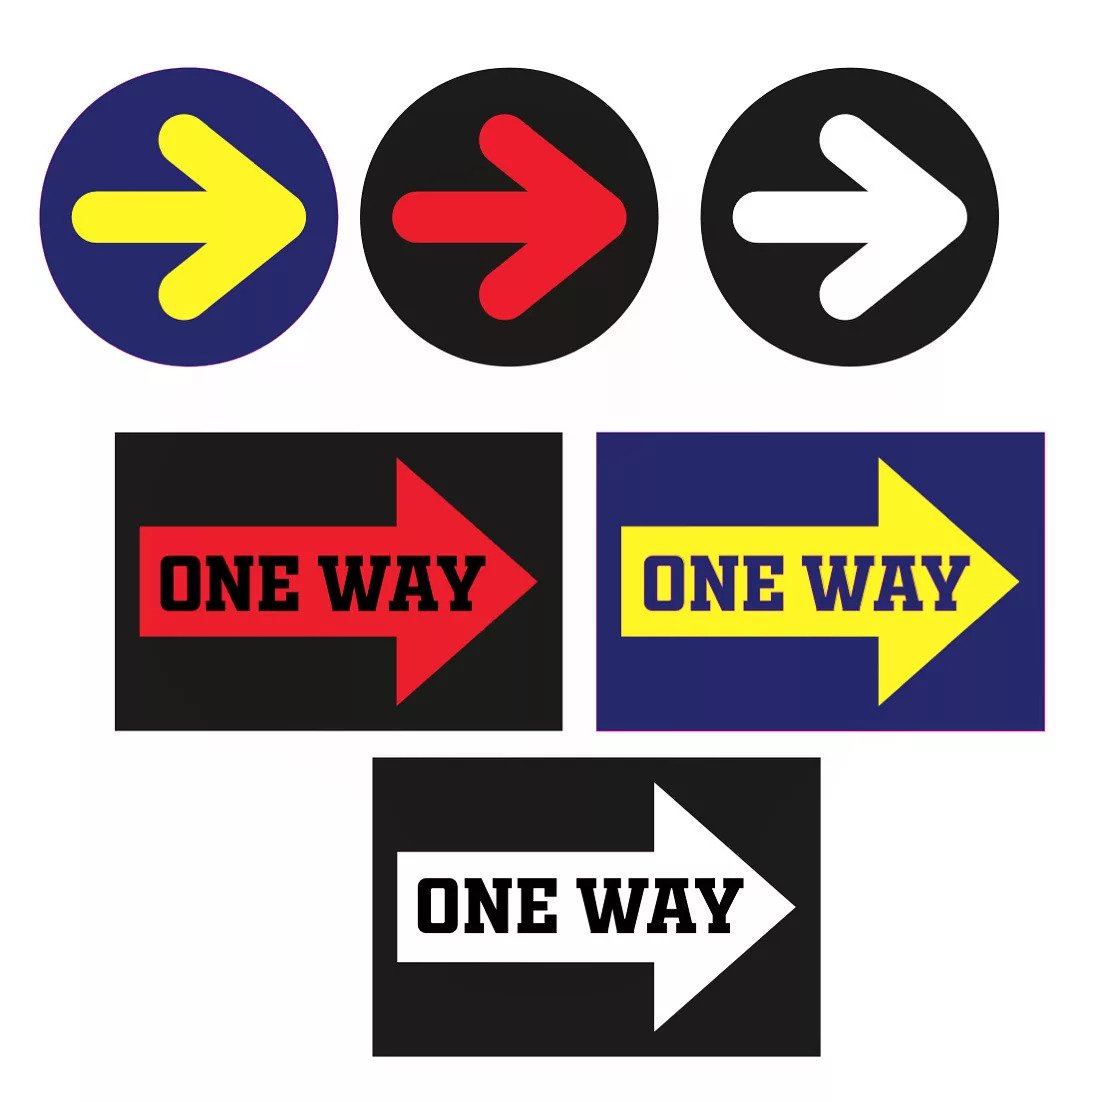 Arrows for Directional Signage